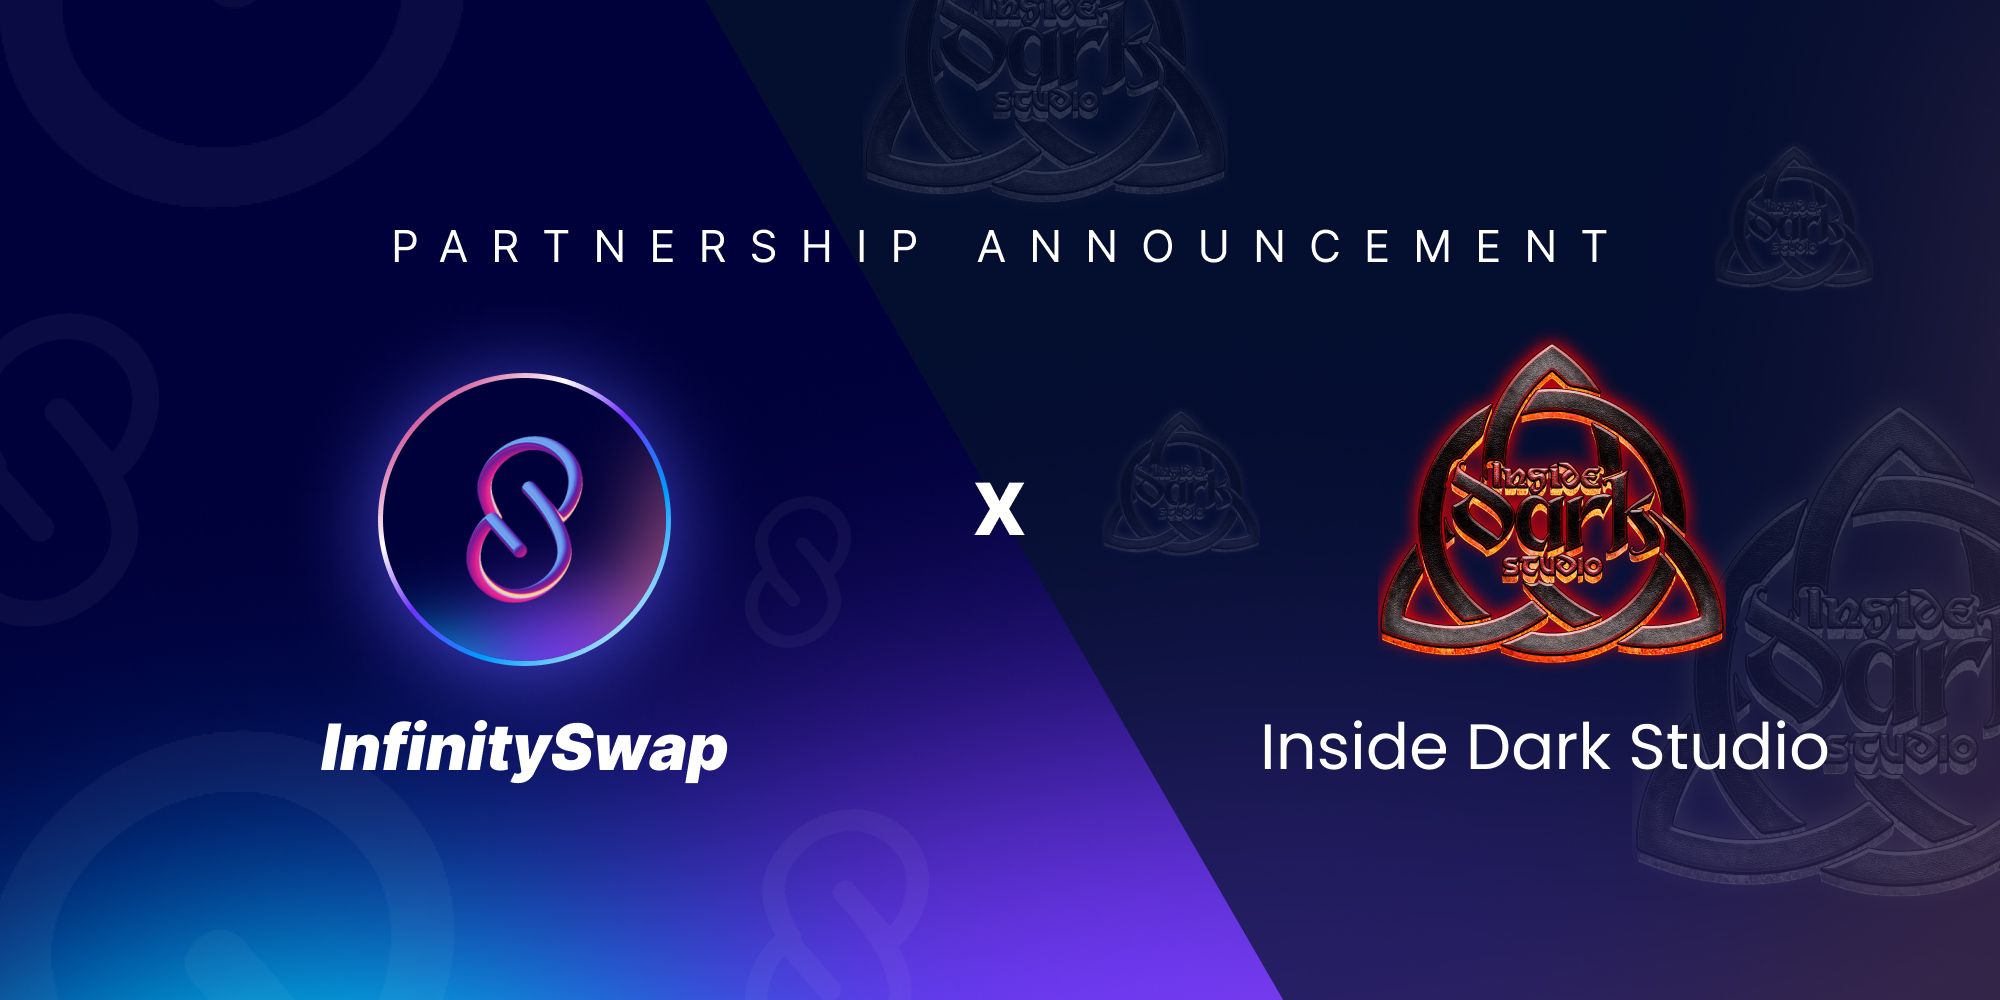 InfinitySwap Forms a Strategic Partnership with Inside Dark Studio: Do you See the Light?